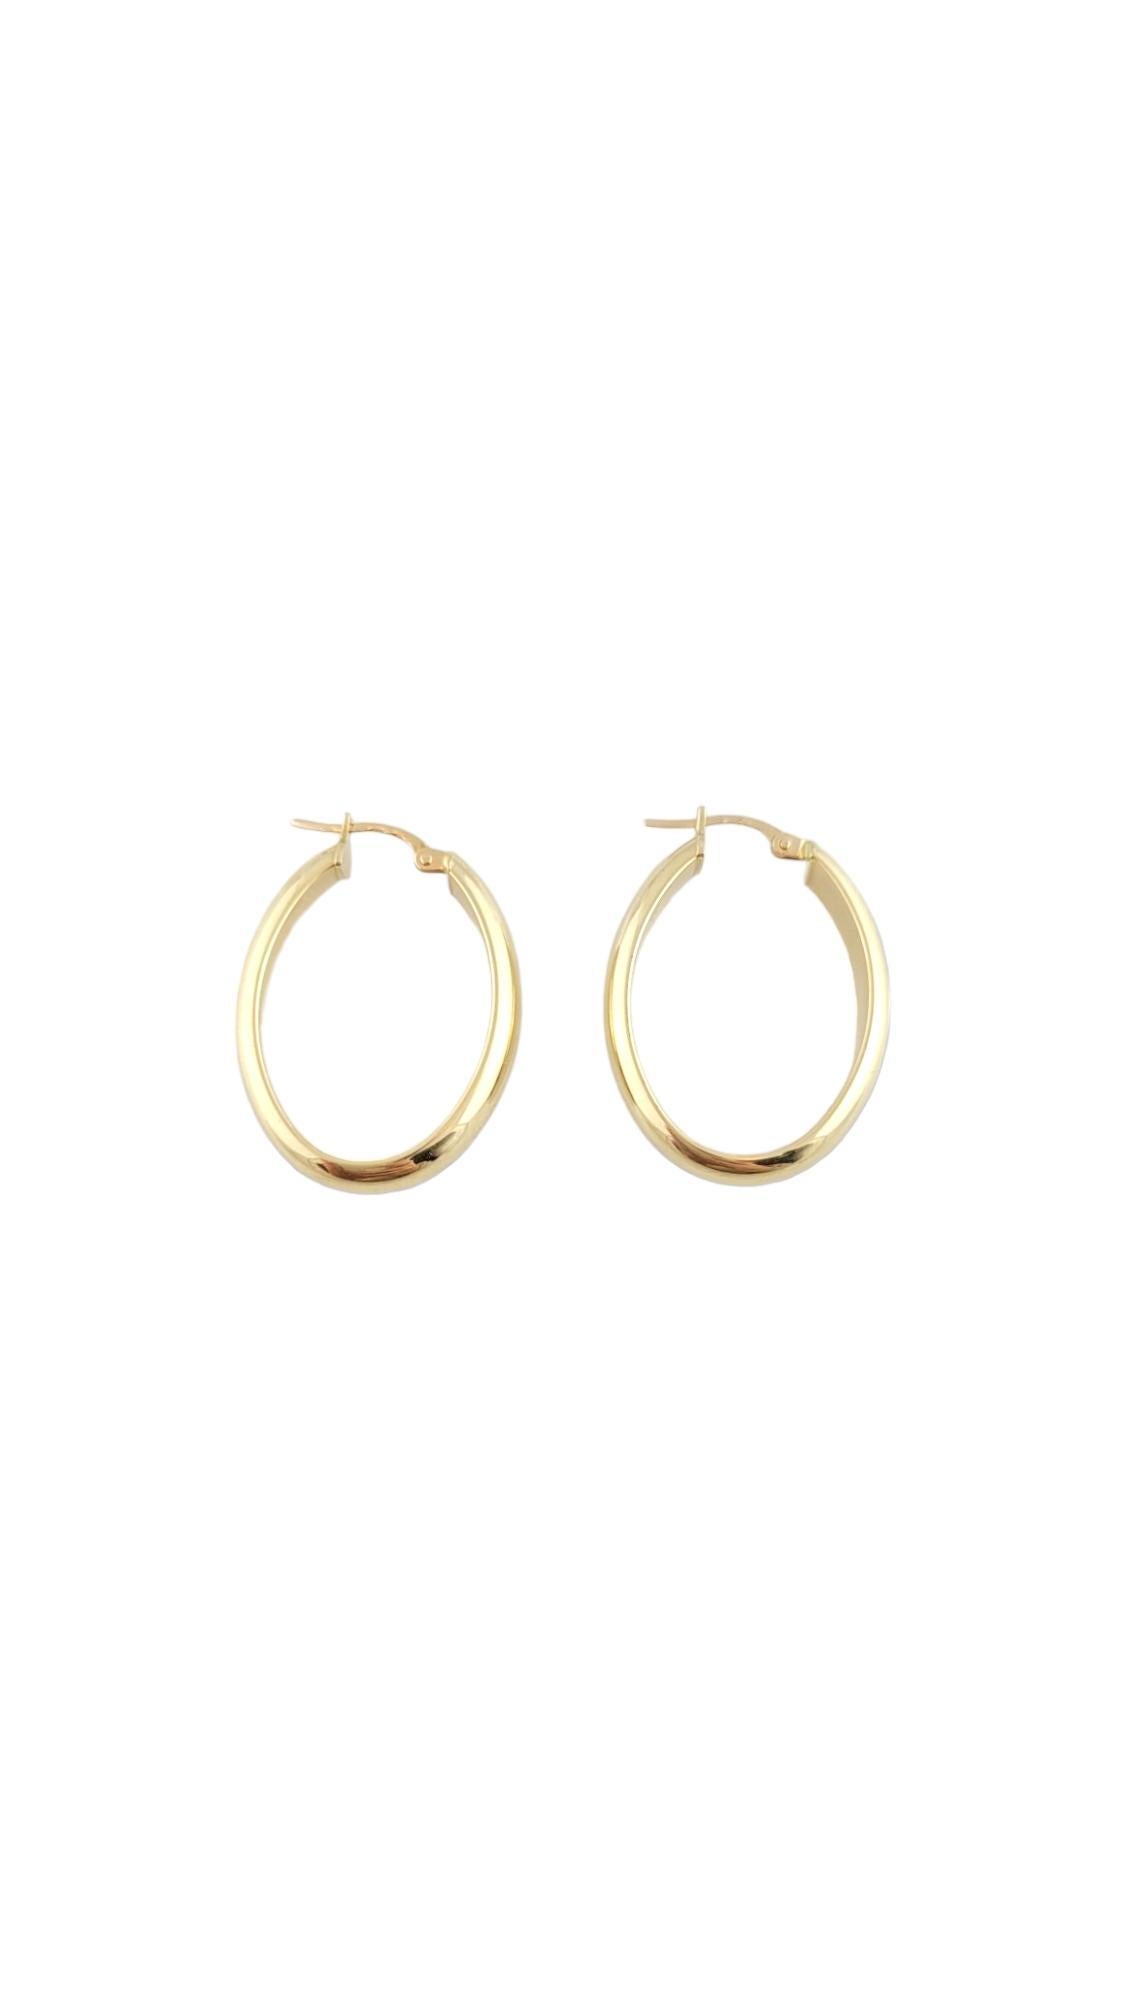 Vintage 14K Yellow Gold Oval Hoop Earrings

Oval hoop earrings in 14K yellow gold details.

Weight: 1.9 dwt./ 2.93 g

Hallmark: Italy 14K Milor

Size: 31 mm X 22.7 mm/1.2 in X 0.9 in

Approximately 5 mm thick.

Very good condition, professionally